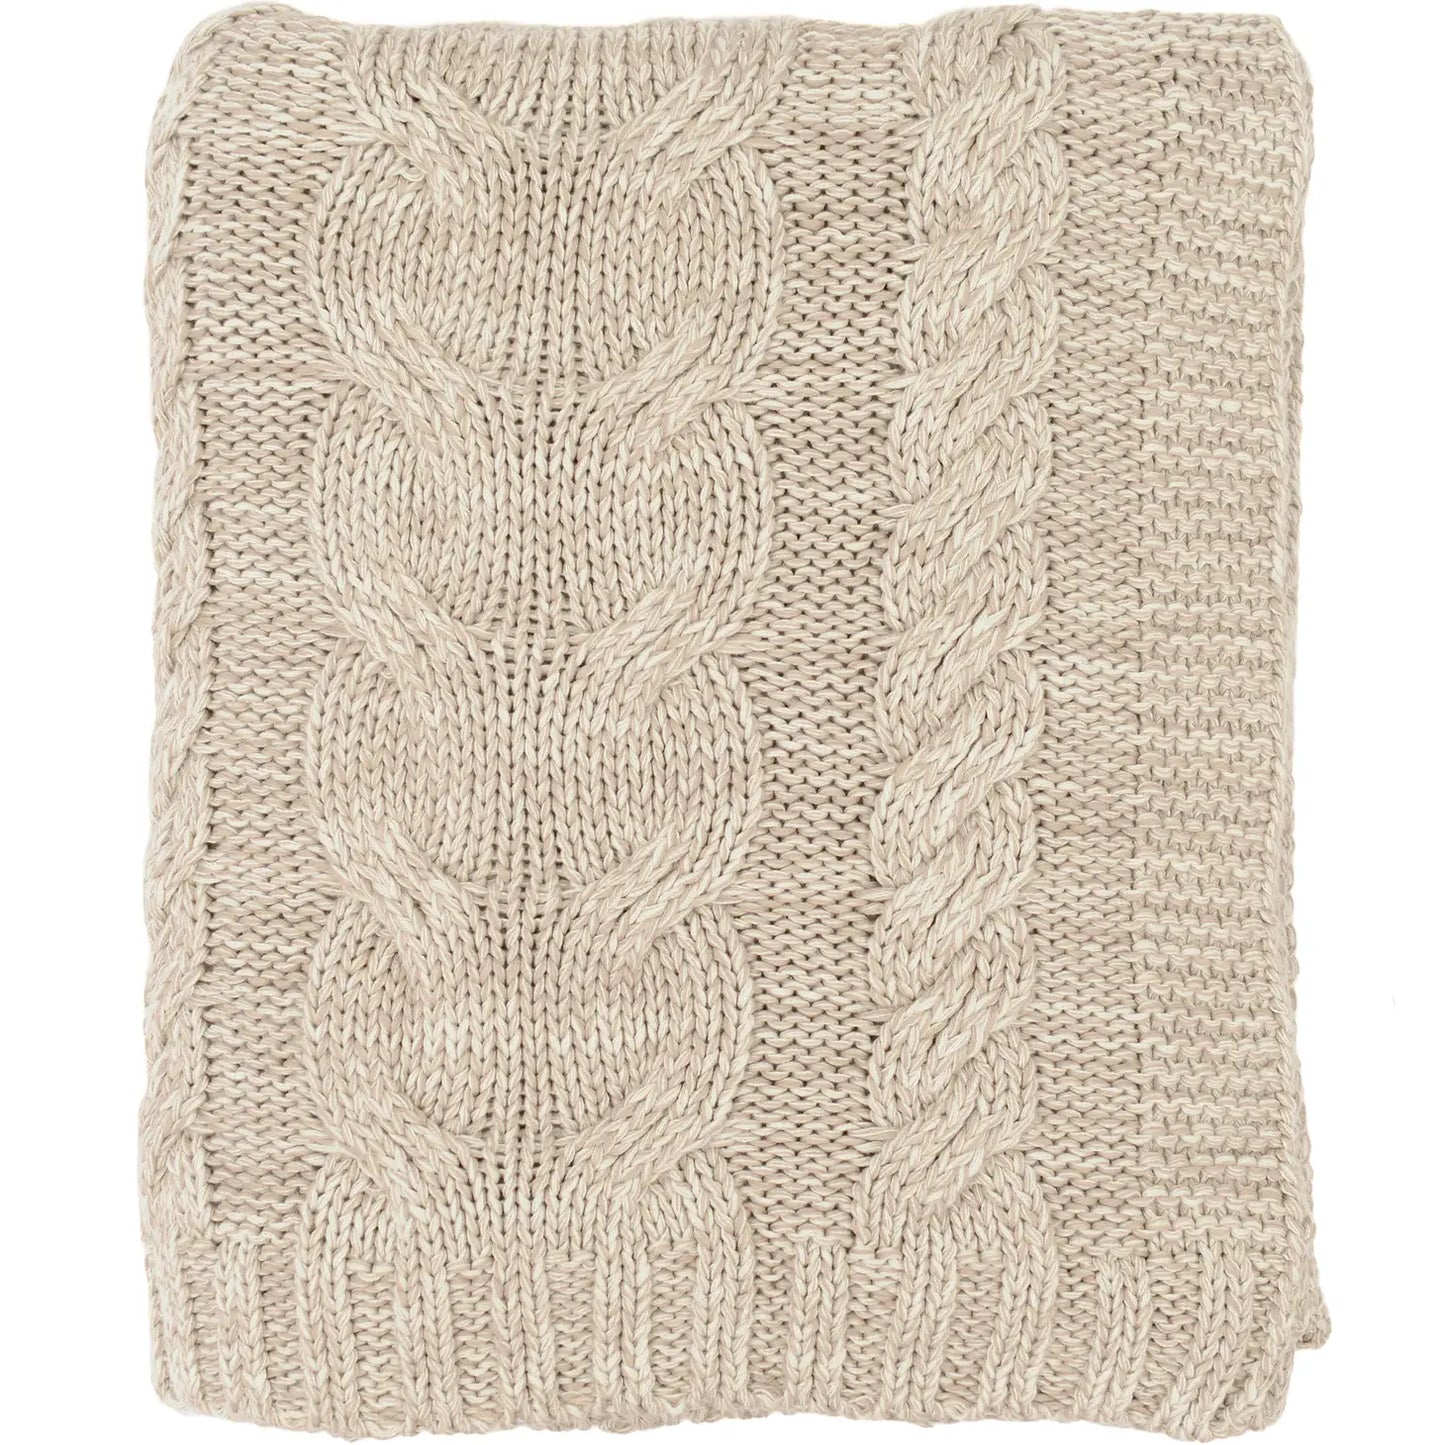 Chunky Knitted Sustainable Cotton Throw Blanket